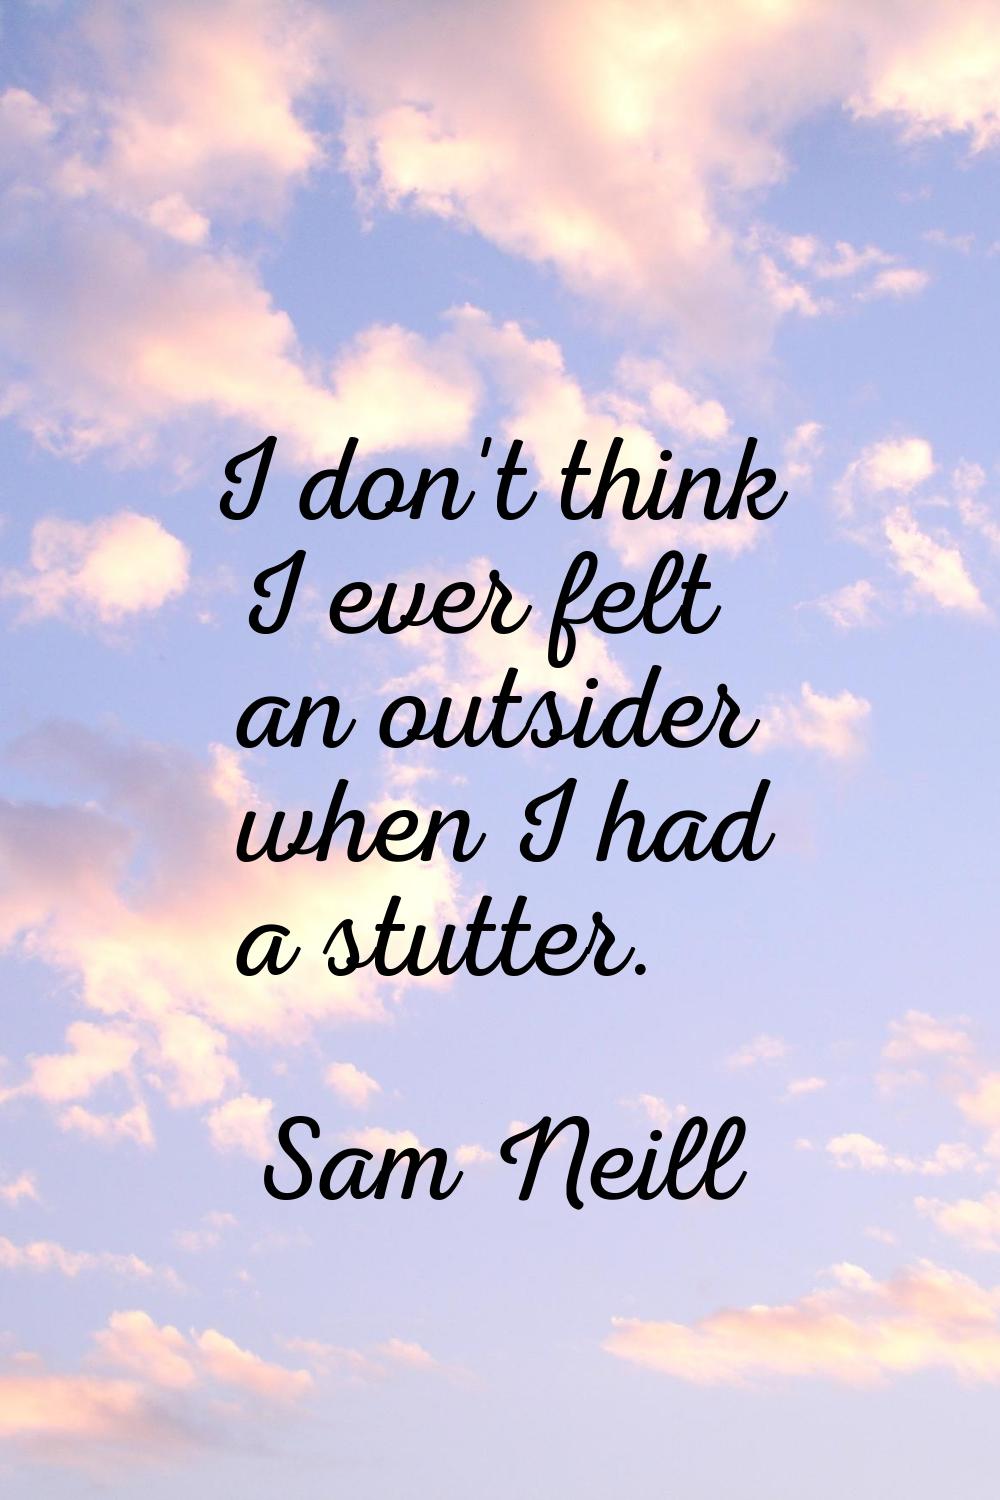 I don't think I ever felt an outsider when I had a stutter.